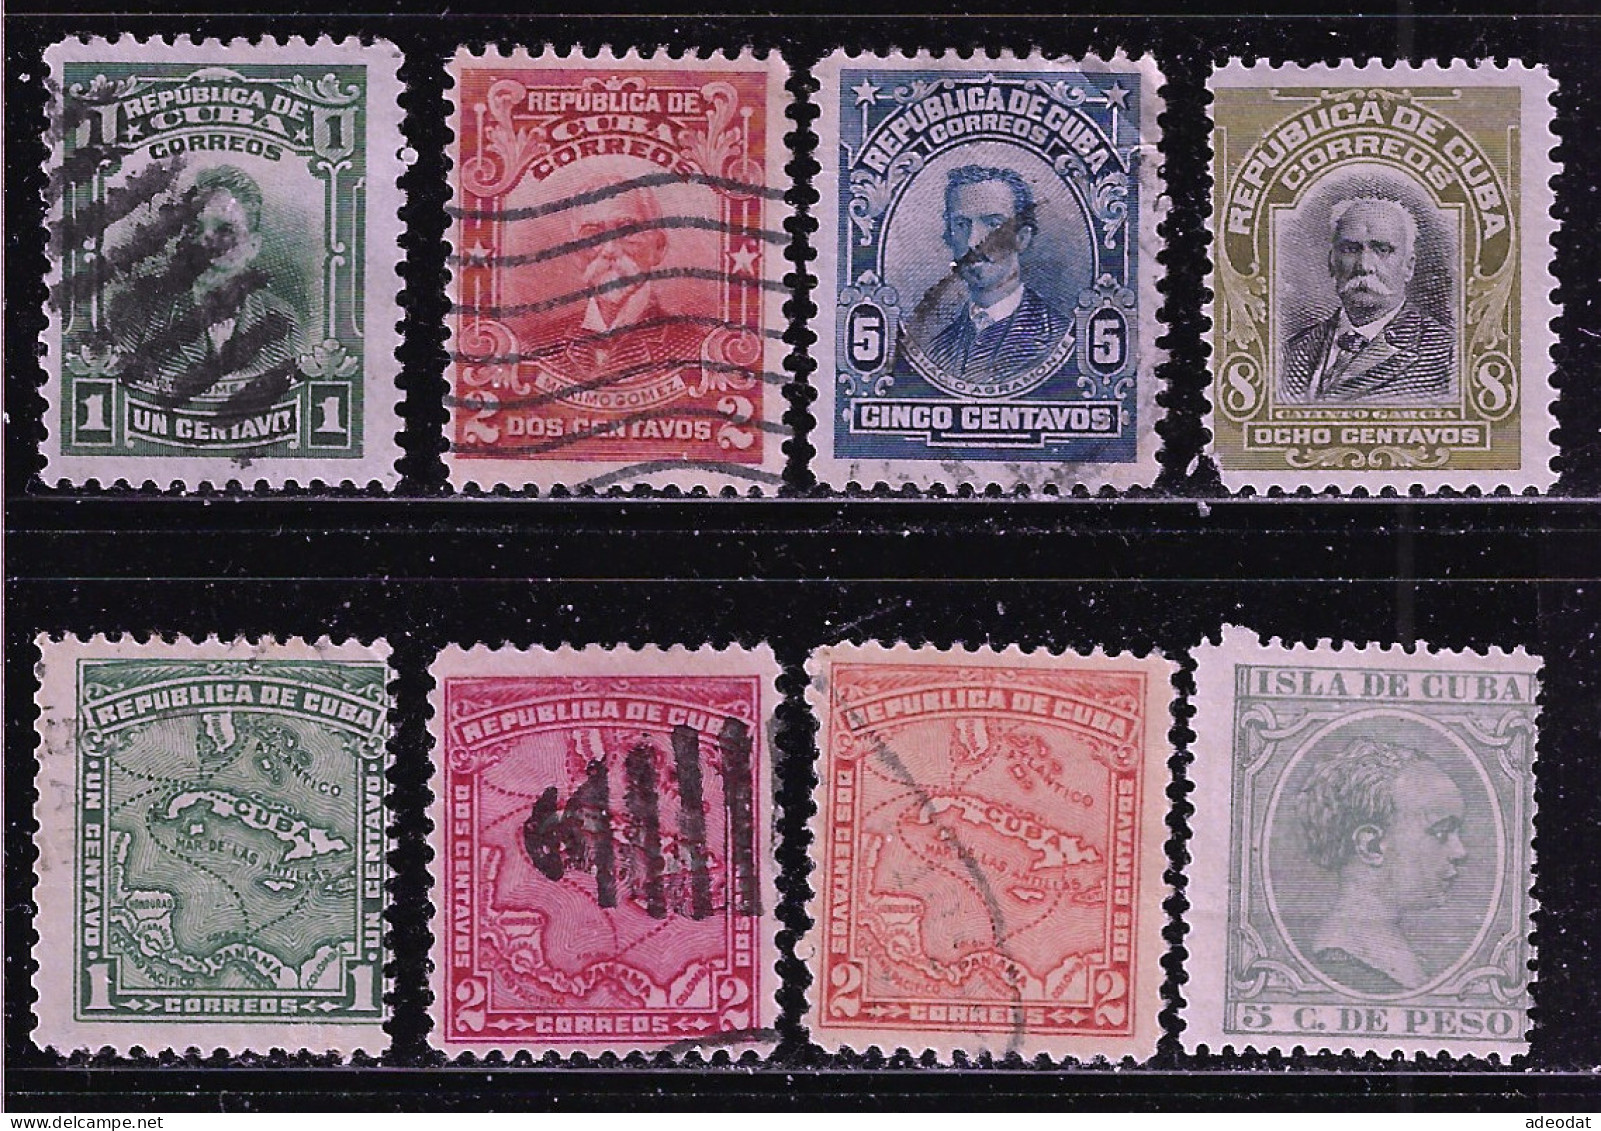 CUBA 1910-1914 SCOTT 239...255 CANCELLED - Used Stamps